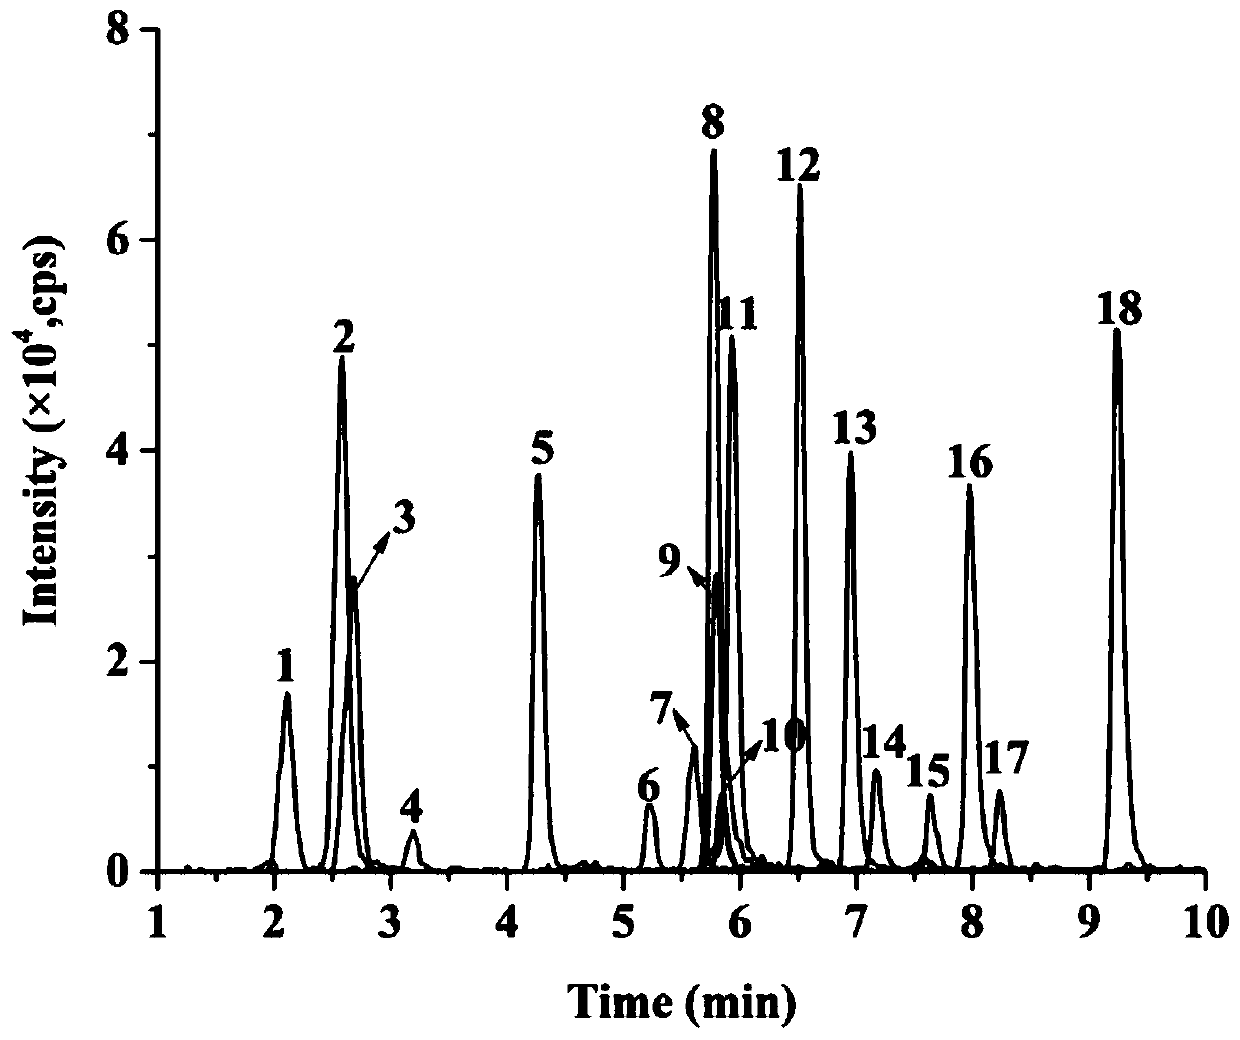 Chemical derivatization-ultra-high performance liquid chromatography-tandem mass spectrometry method for simultaneously detecting 18 steroid hormones in serum